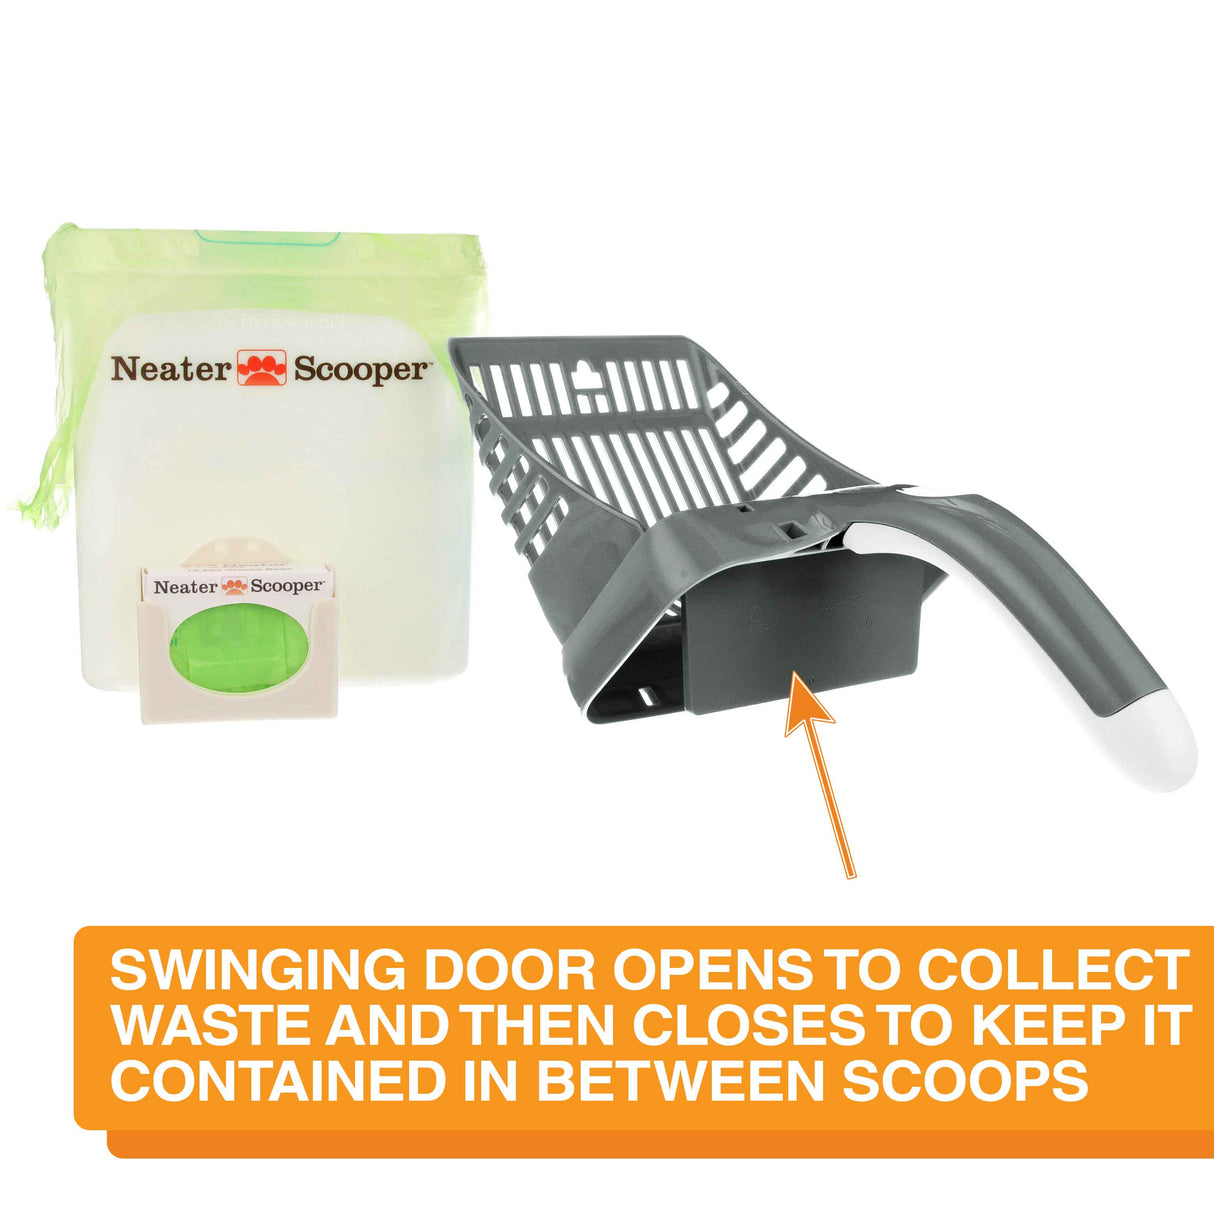 Swing door opens to collect waste and then closes to keep it contained in between scoops